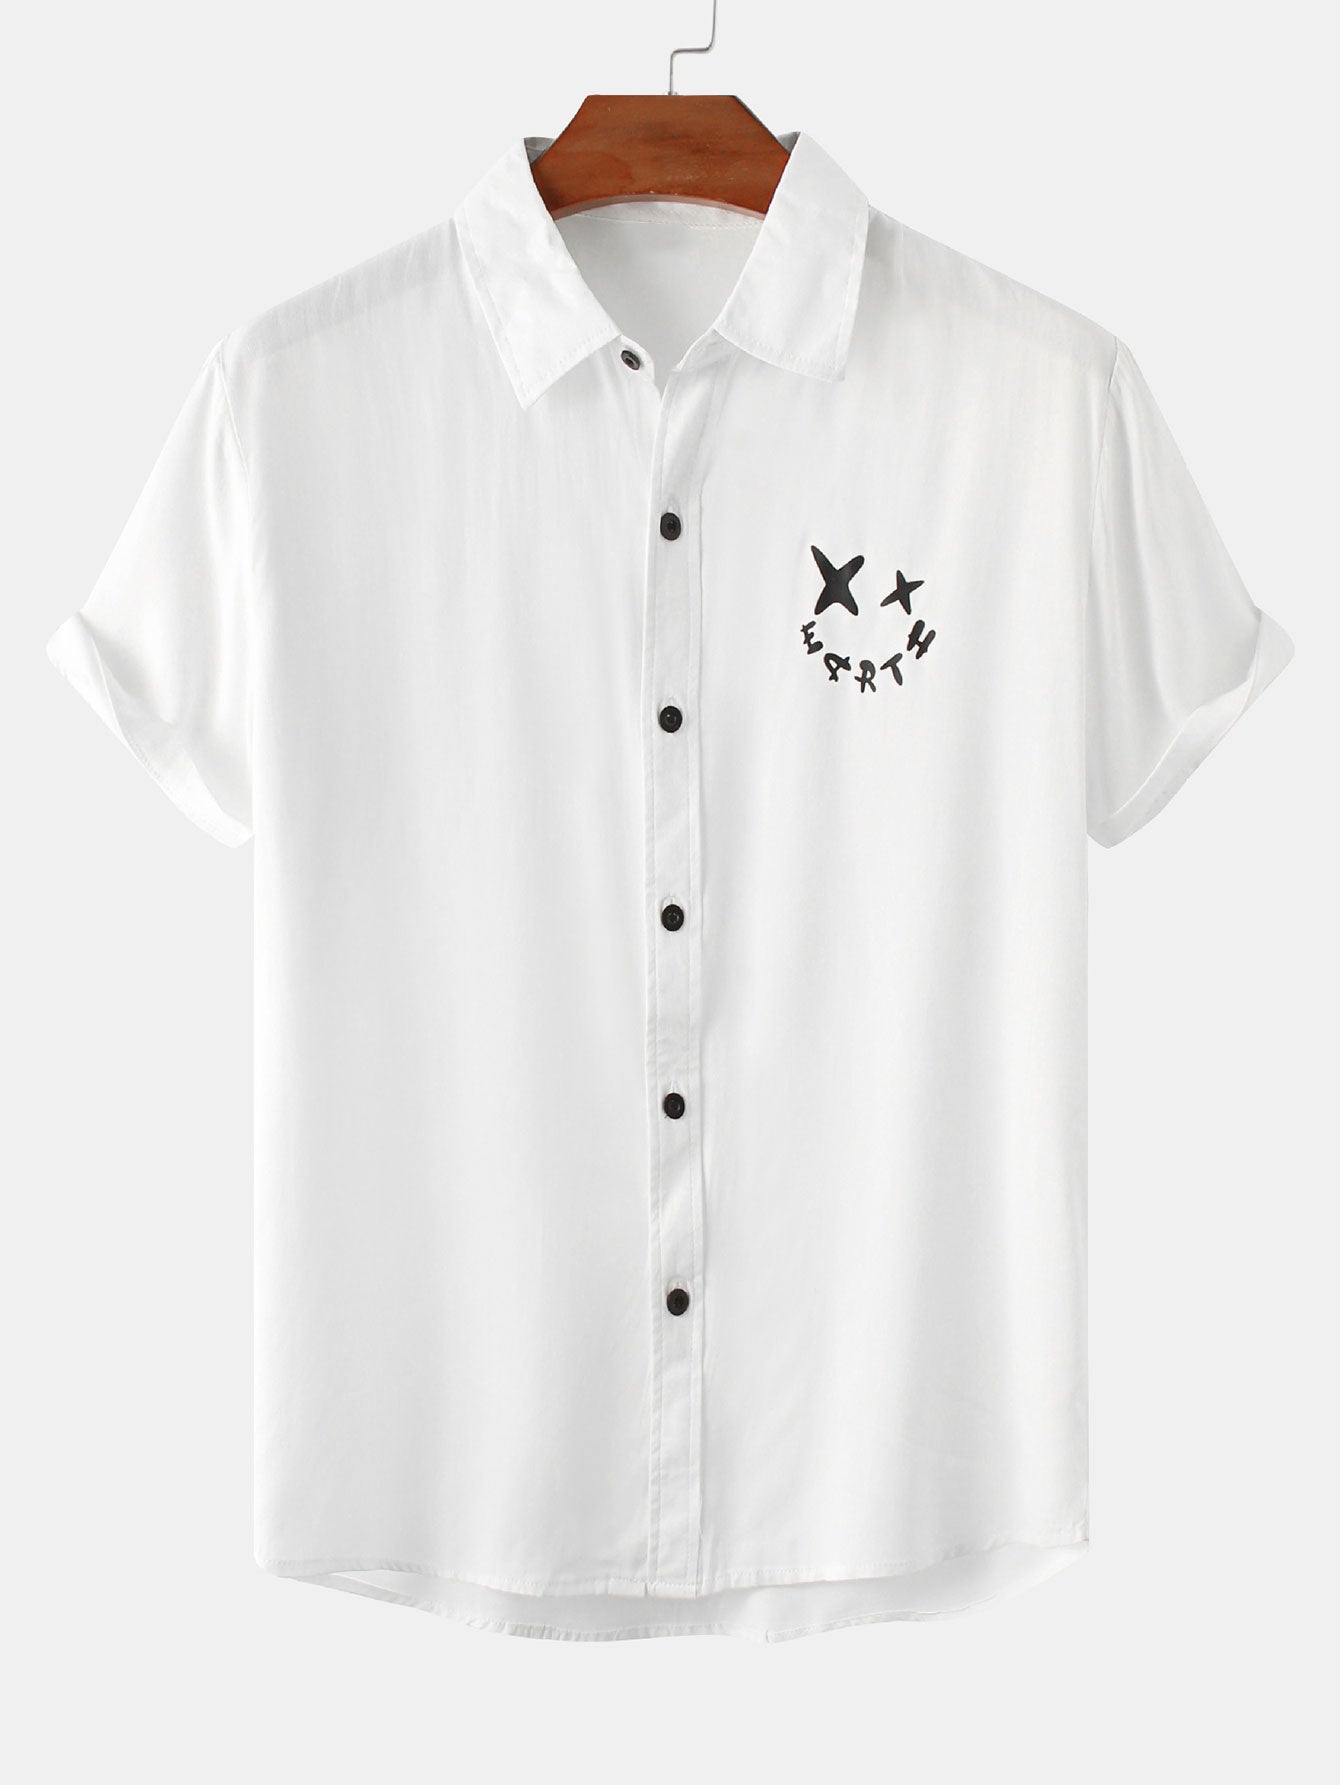 Smiley Graphic Print Button Up Shirt